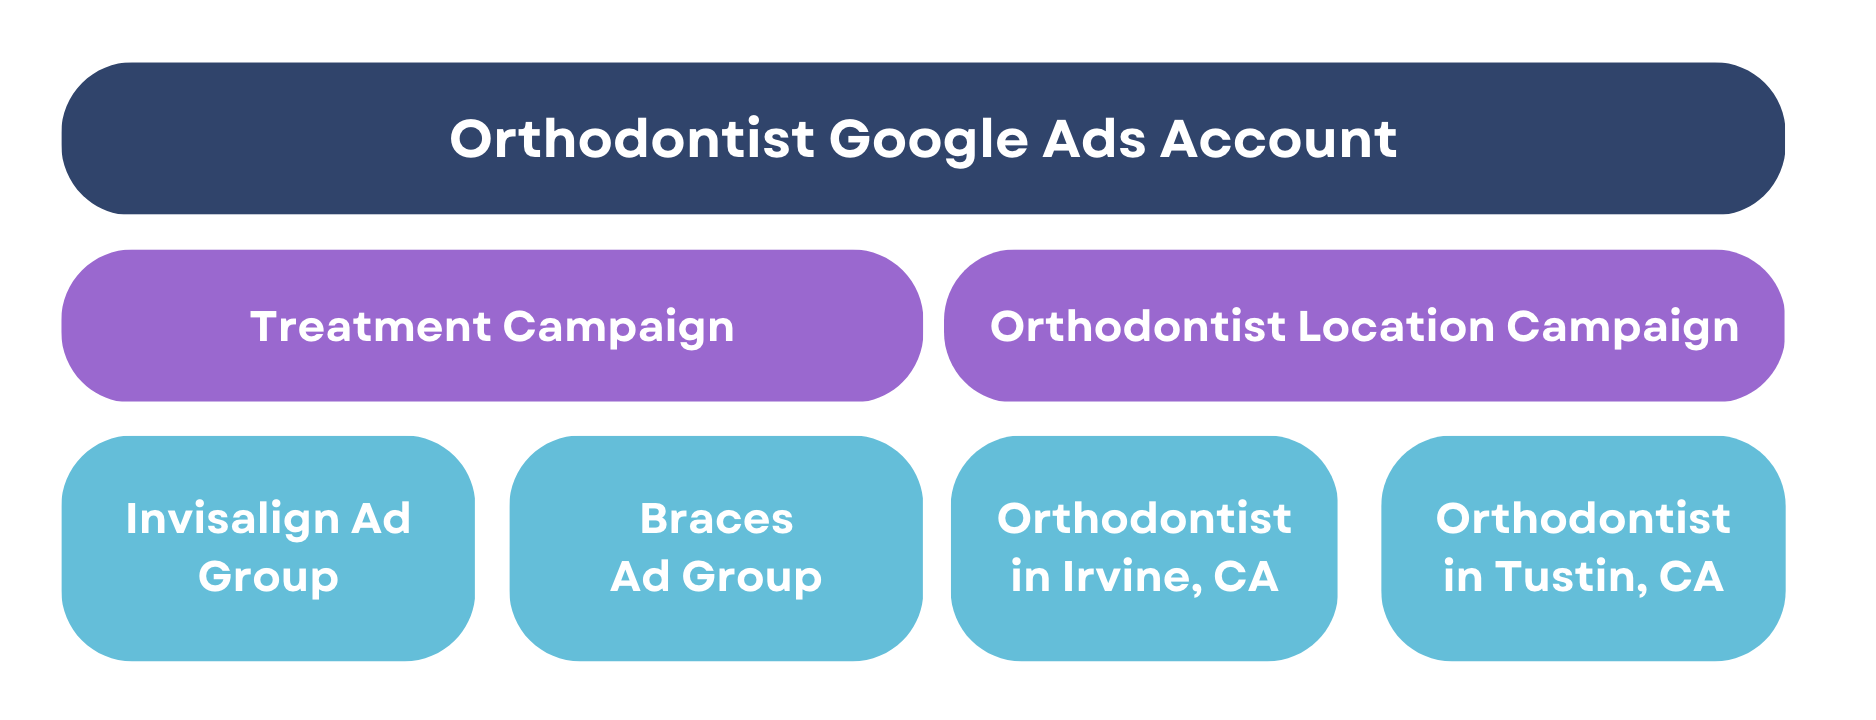 Diagram that shows a Google Ads campaign structure for an Orthodontist Google Ads account.